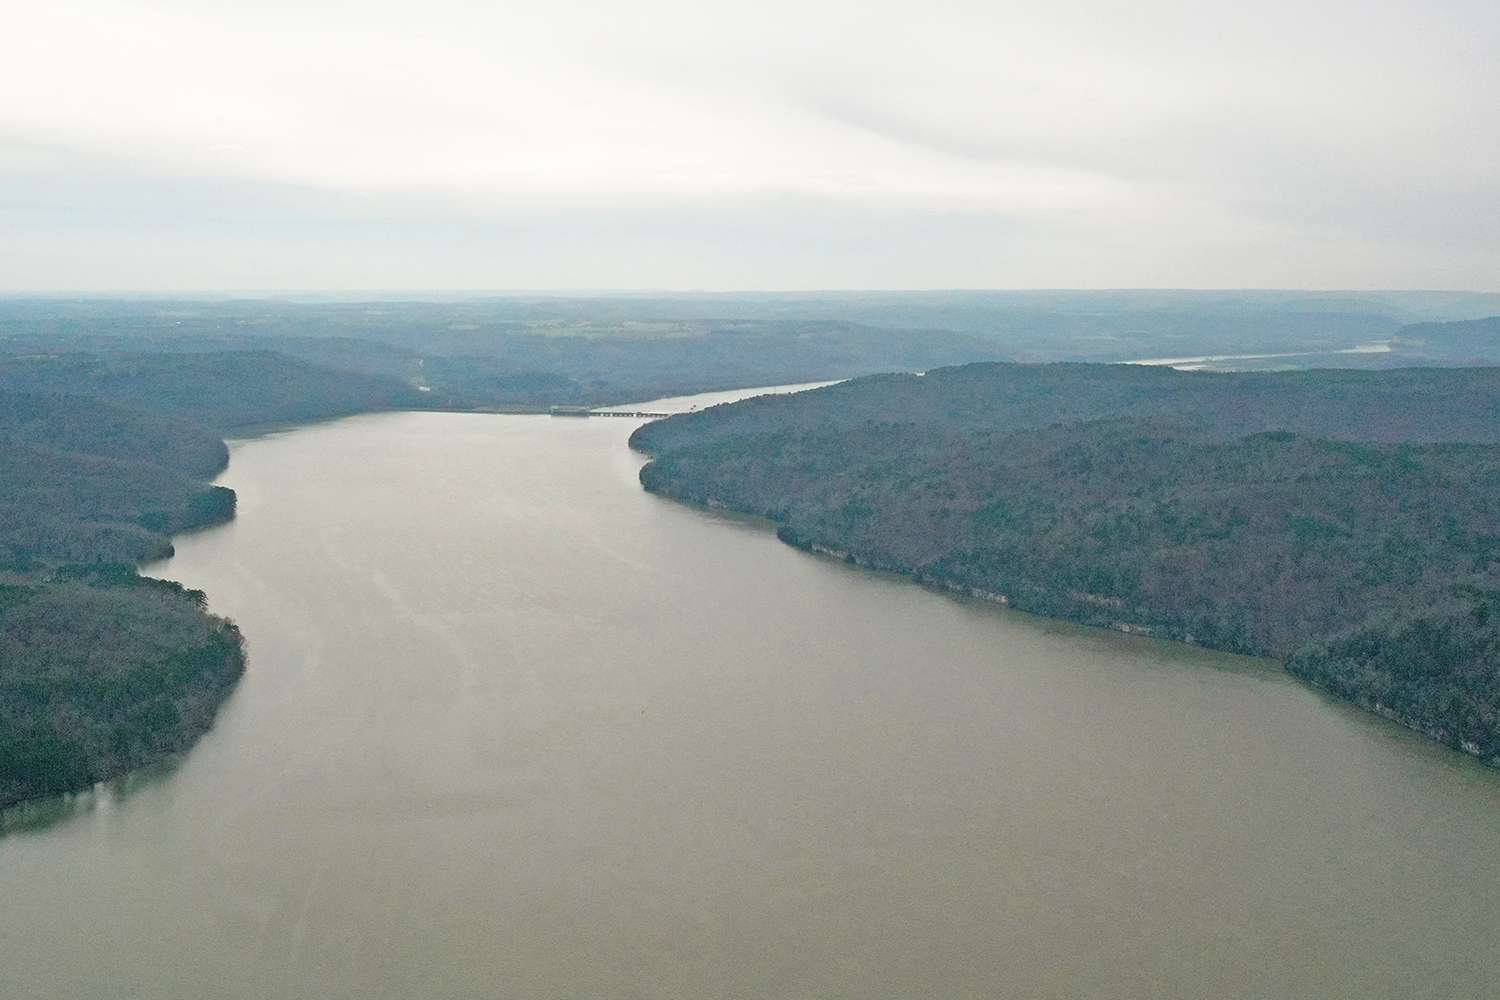 If you look carefully, you can see Guntersville Dam in the distance where it dumps into Wheeler Lake. After Wheeler it becomes Wilson, then Pickwick before finally dumping into Kentucky Lake. 